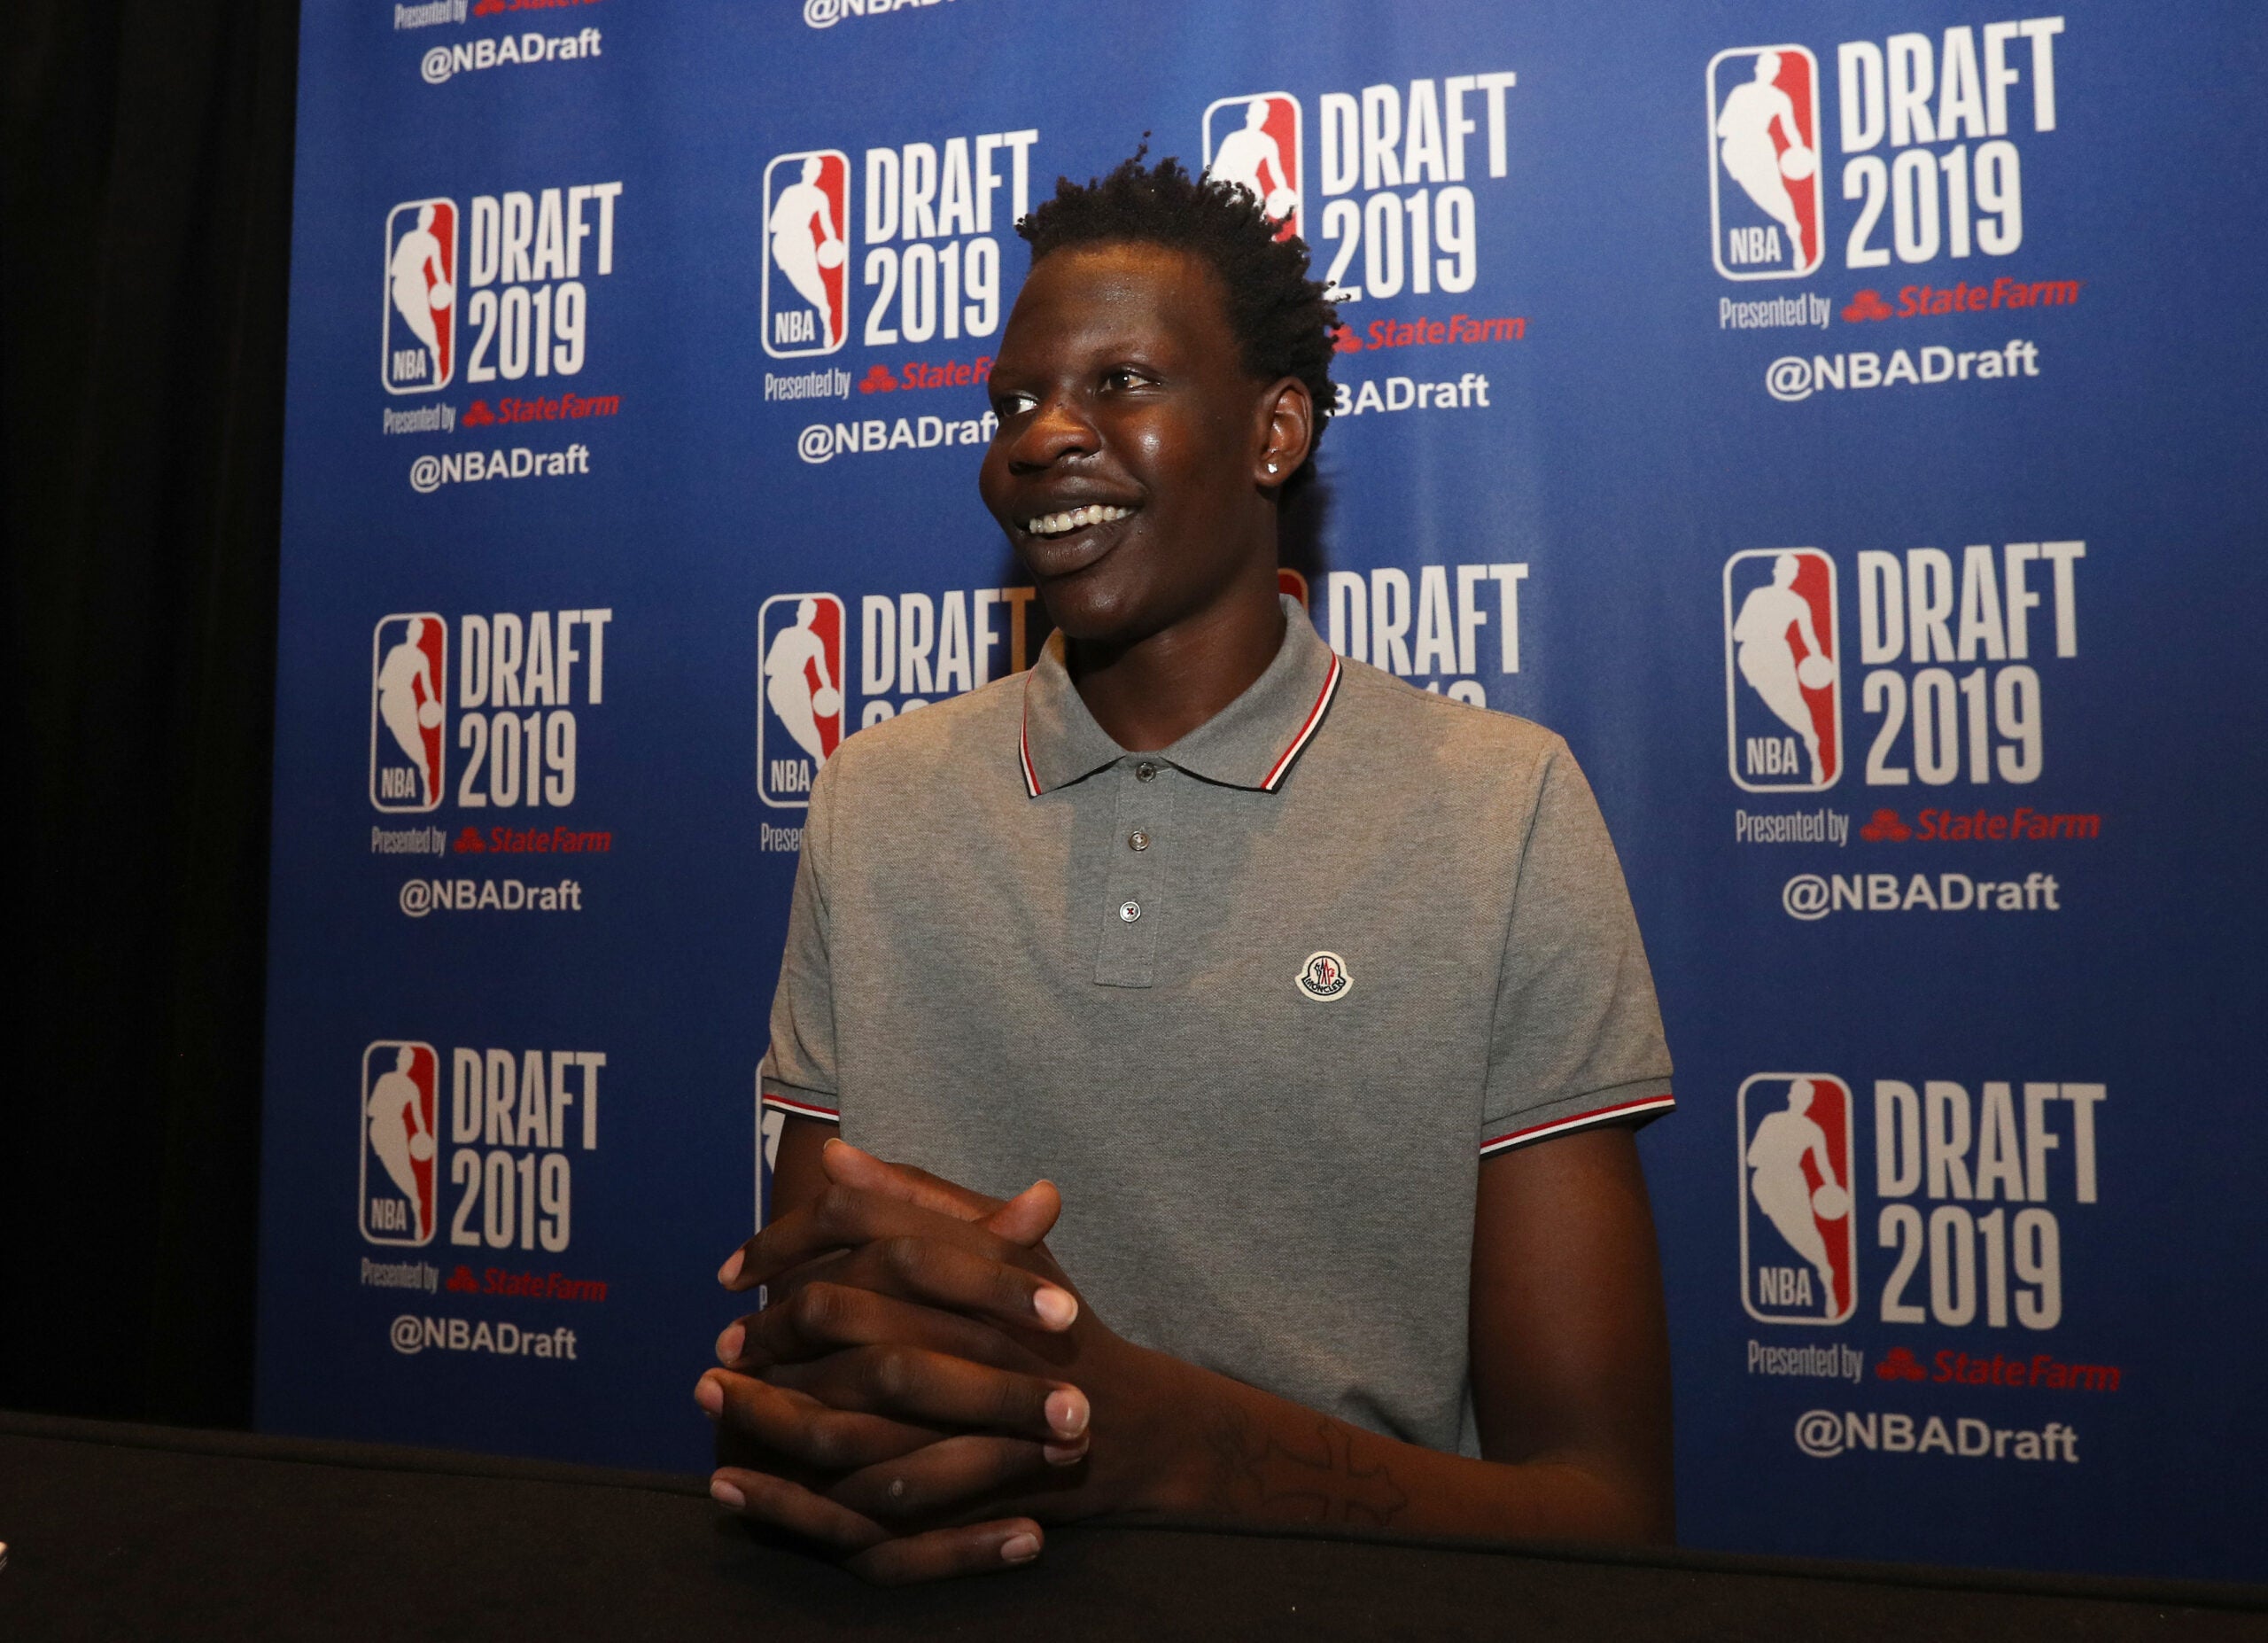 Sports Q: Who should the Celtics take with the 14th pick in the NBA Draft?